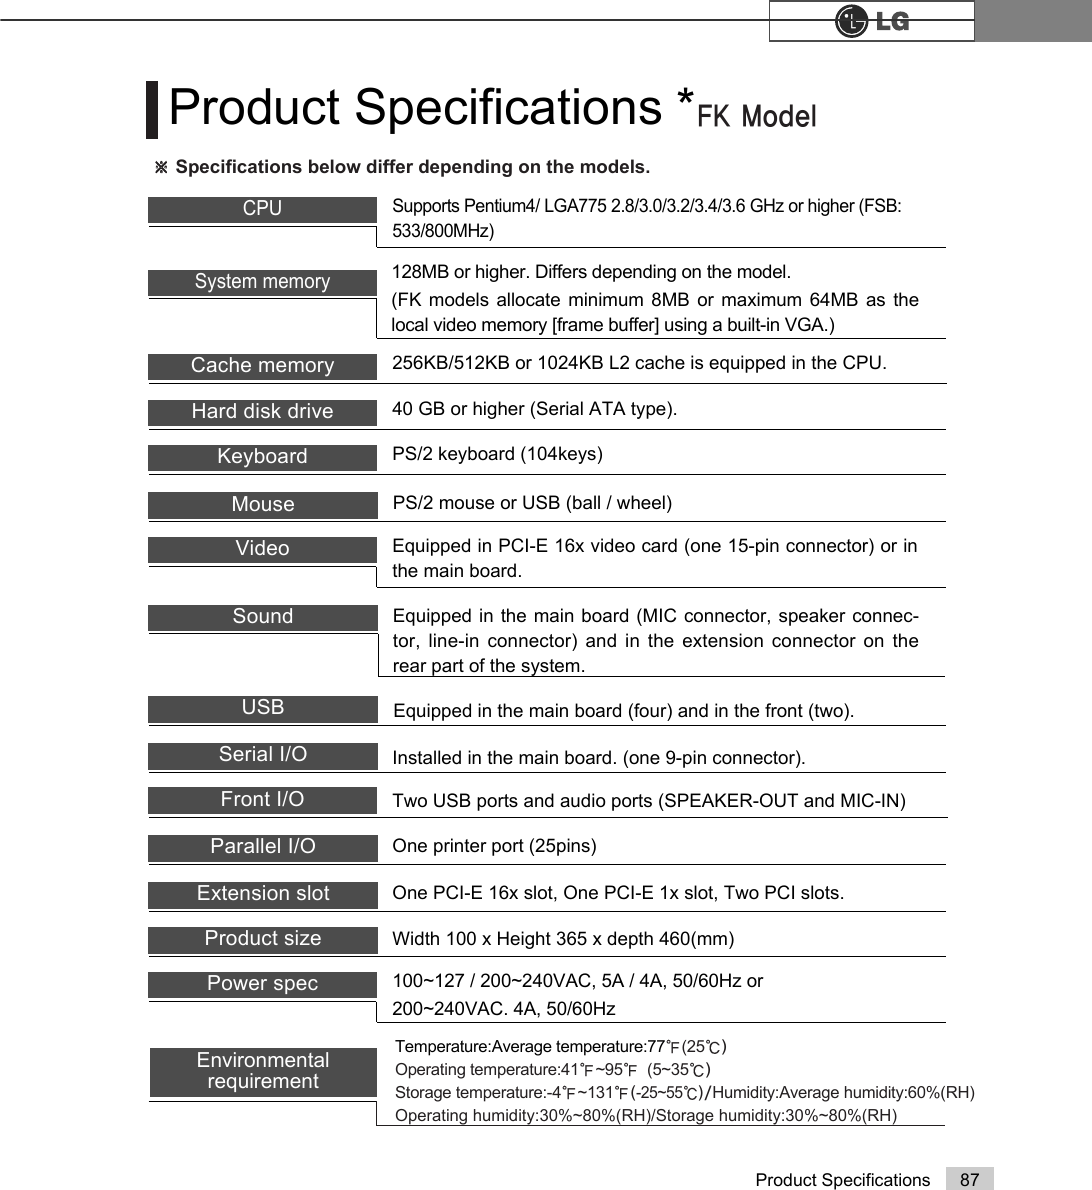 87Product SpecificationsProduct Specifications *).0RGHOMouse PS/2 mouse or USB (ball / wheel)Sound Equipped in the main board (MIC connector, speaker connec-tor, line-in connector) and in the extension connector on therear part of the system.System memory128MB or higher. Differs depending on the model. (FK models allocate minimum 8MB or maximum 64MB as thelocal video memory [frame buffer] using a built-in VGA.)USB Equipped in the main board (four) and in the front (two).Serial I/O Installed in the main board. (one 9-pin connector).Parallel I/O One printer port (25pins)Extension slot One PCI-E 16x slot, One PCI-E 1x slot, Two PCI slots.Product size Width 100 x Height 365 x depth 460(mm)Power spec 100~127 / 200~240VAC, 5A / 4A, 50/60Hz or200~240VAC. 4A, 50/60HzFront I/O Two USB ports and audio ports (SPEAKER-OUT and MIC-IN)Video Equipped in PCI-E 16x video card (one 15-pin connector) or inthe main board.Keyboard PS/2 keyboard (104keys)Hard disk drive 40 GB or higher (Serial ATA type).Cache memory 256KB/512KB or 1024KB L2 cache is equipped in the CPU. CPUSupports Pentium4/ LGA775 2.8/3.0/3.2/3.4/3.6 GHz or higher (FSB:533/800MHz) Temperature:Average temperature:77ĕ(25ËOperating temperature:41ĕ~95ĕ(5~35ËStorage temperature:-4ĕ~131ĕ-25~55ËHumidity:Average humidity:60%(RH) Operating humidity:30%~80%(RH)/Storage humidity:30%~80%(RH)Environmental requirementÚÚSpecifications below differ depending on the models.